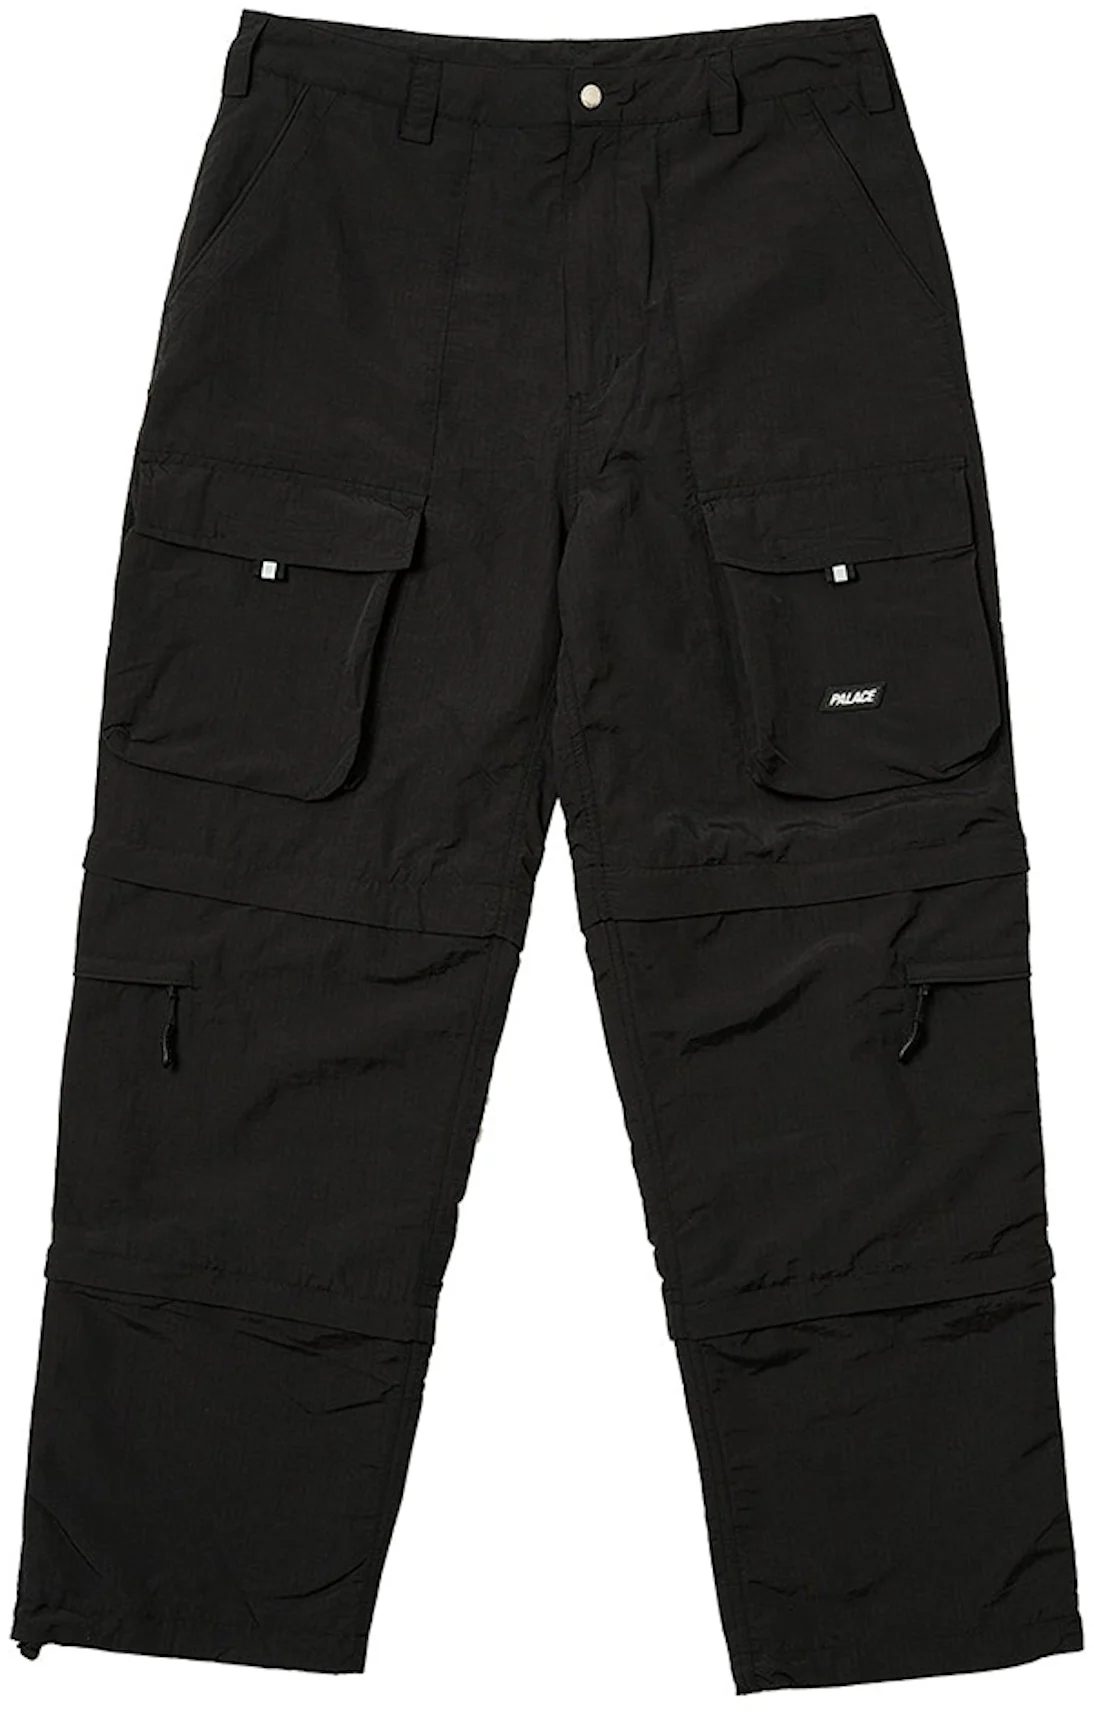 Palace Ultra Relax Trouser BlackPalace Ultra Relax Trouser Black - OFour